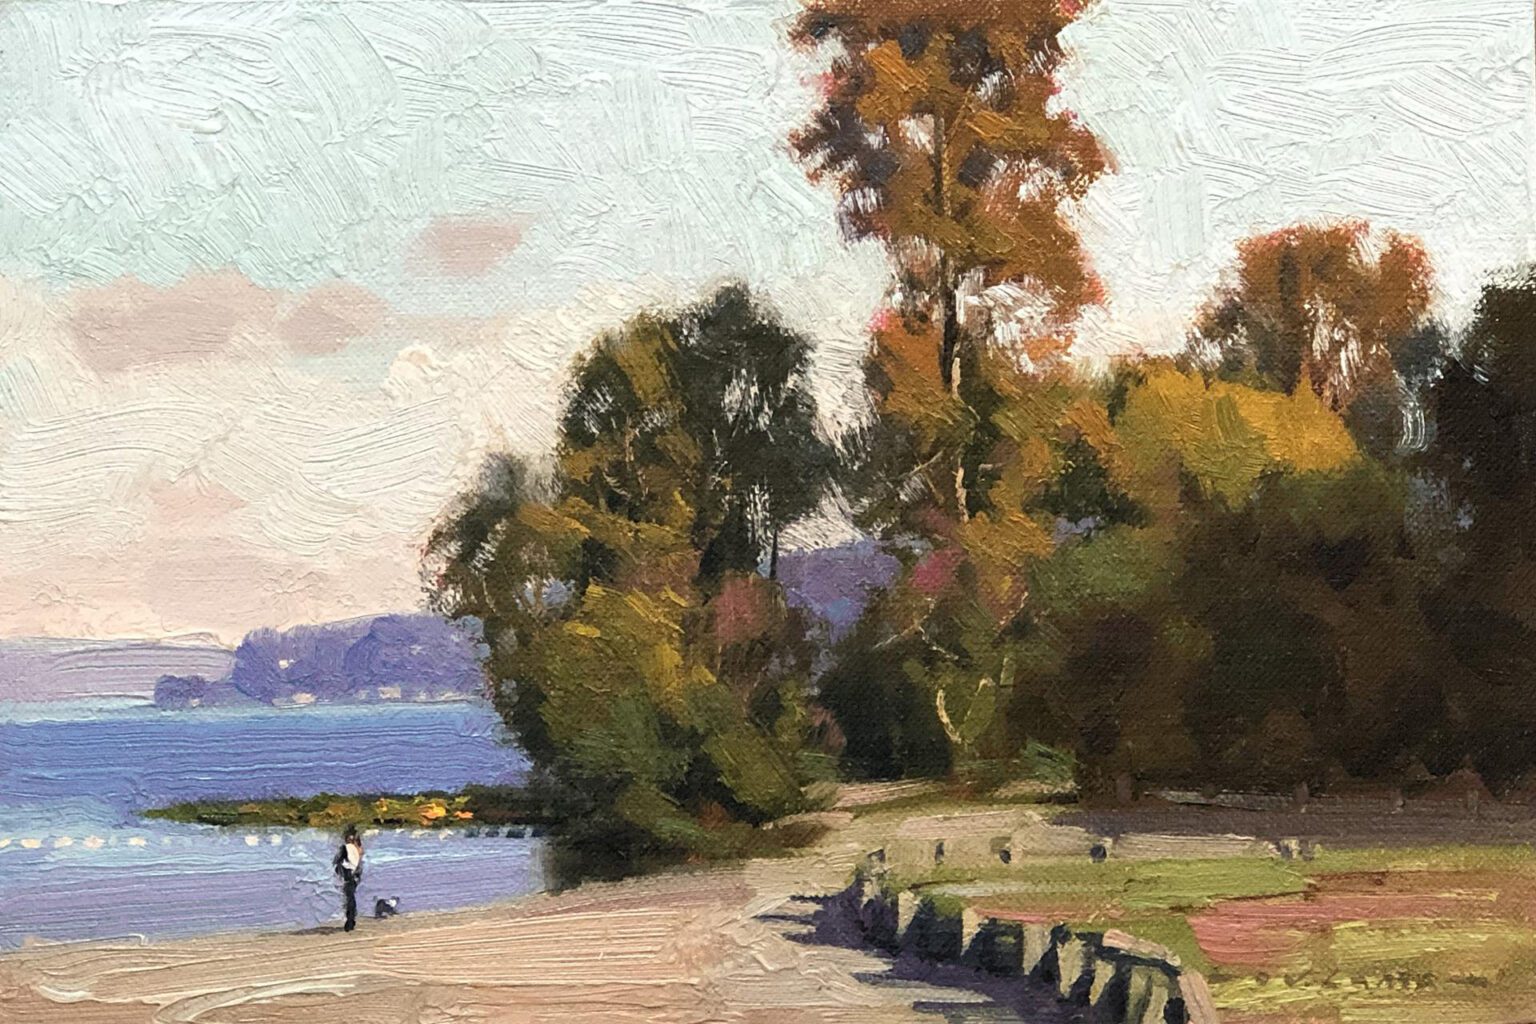 Jim Lamb's “October Shore” oil painting can be seen at an opening reception for the seventh annual “Little Gems” Small Works Show happening from 6–8 p.m. Friday